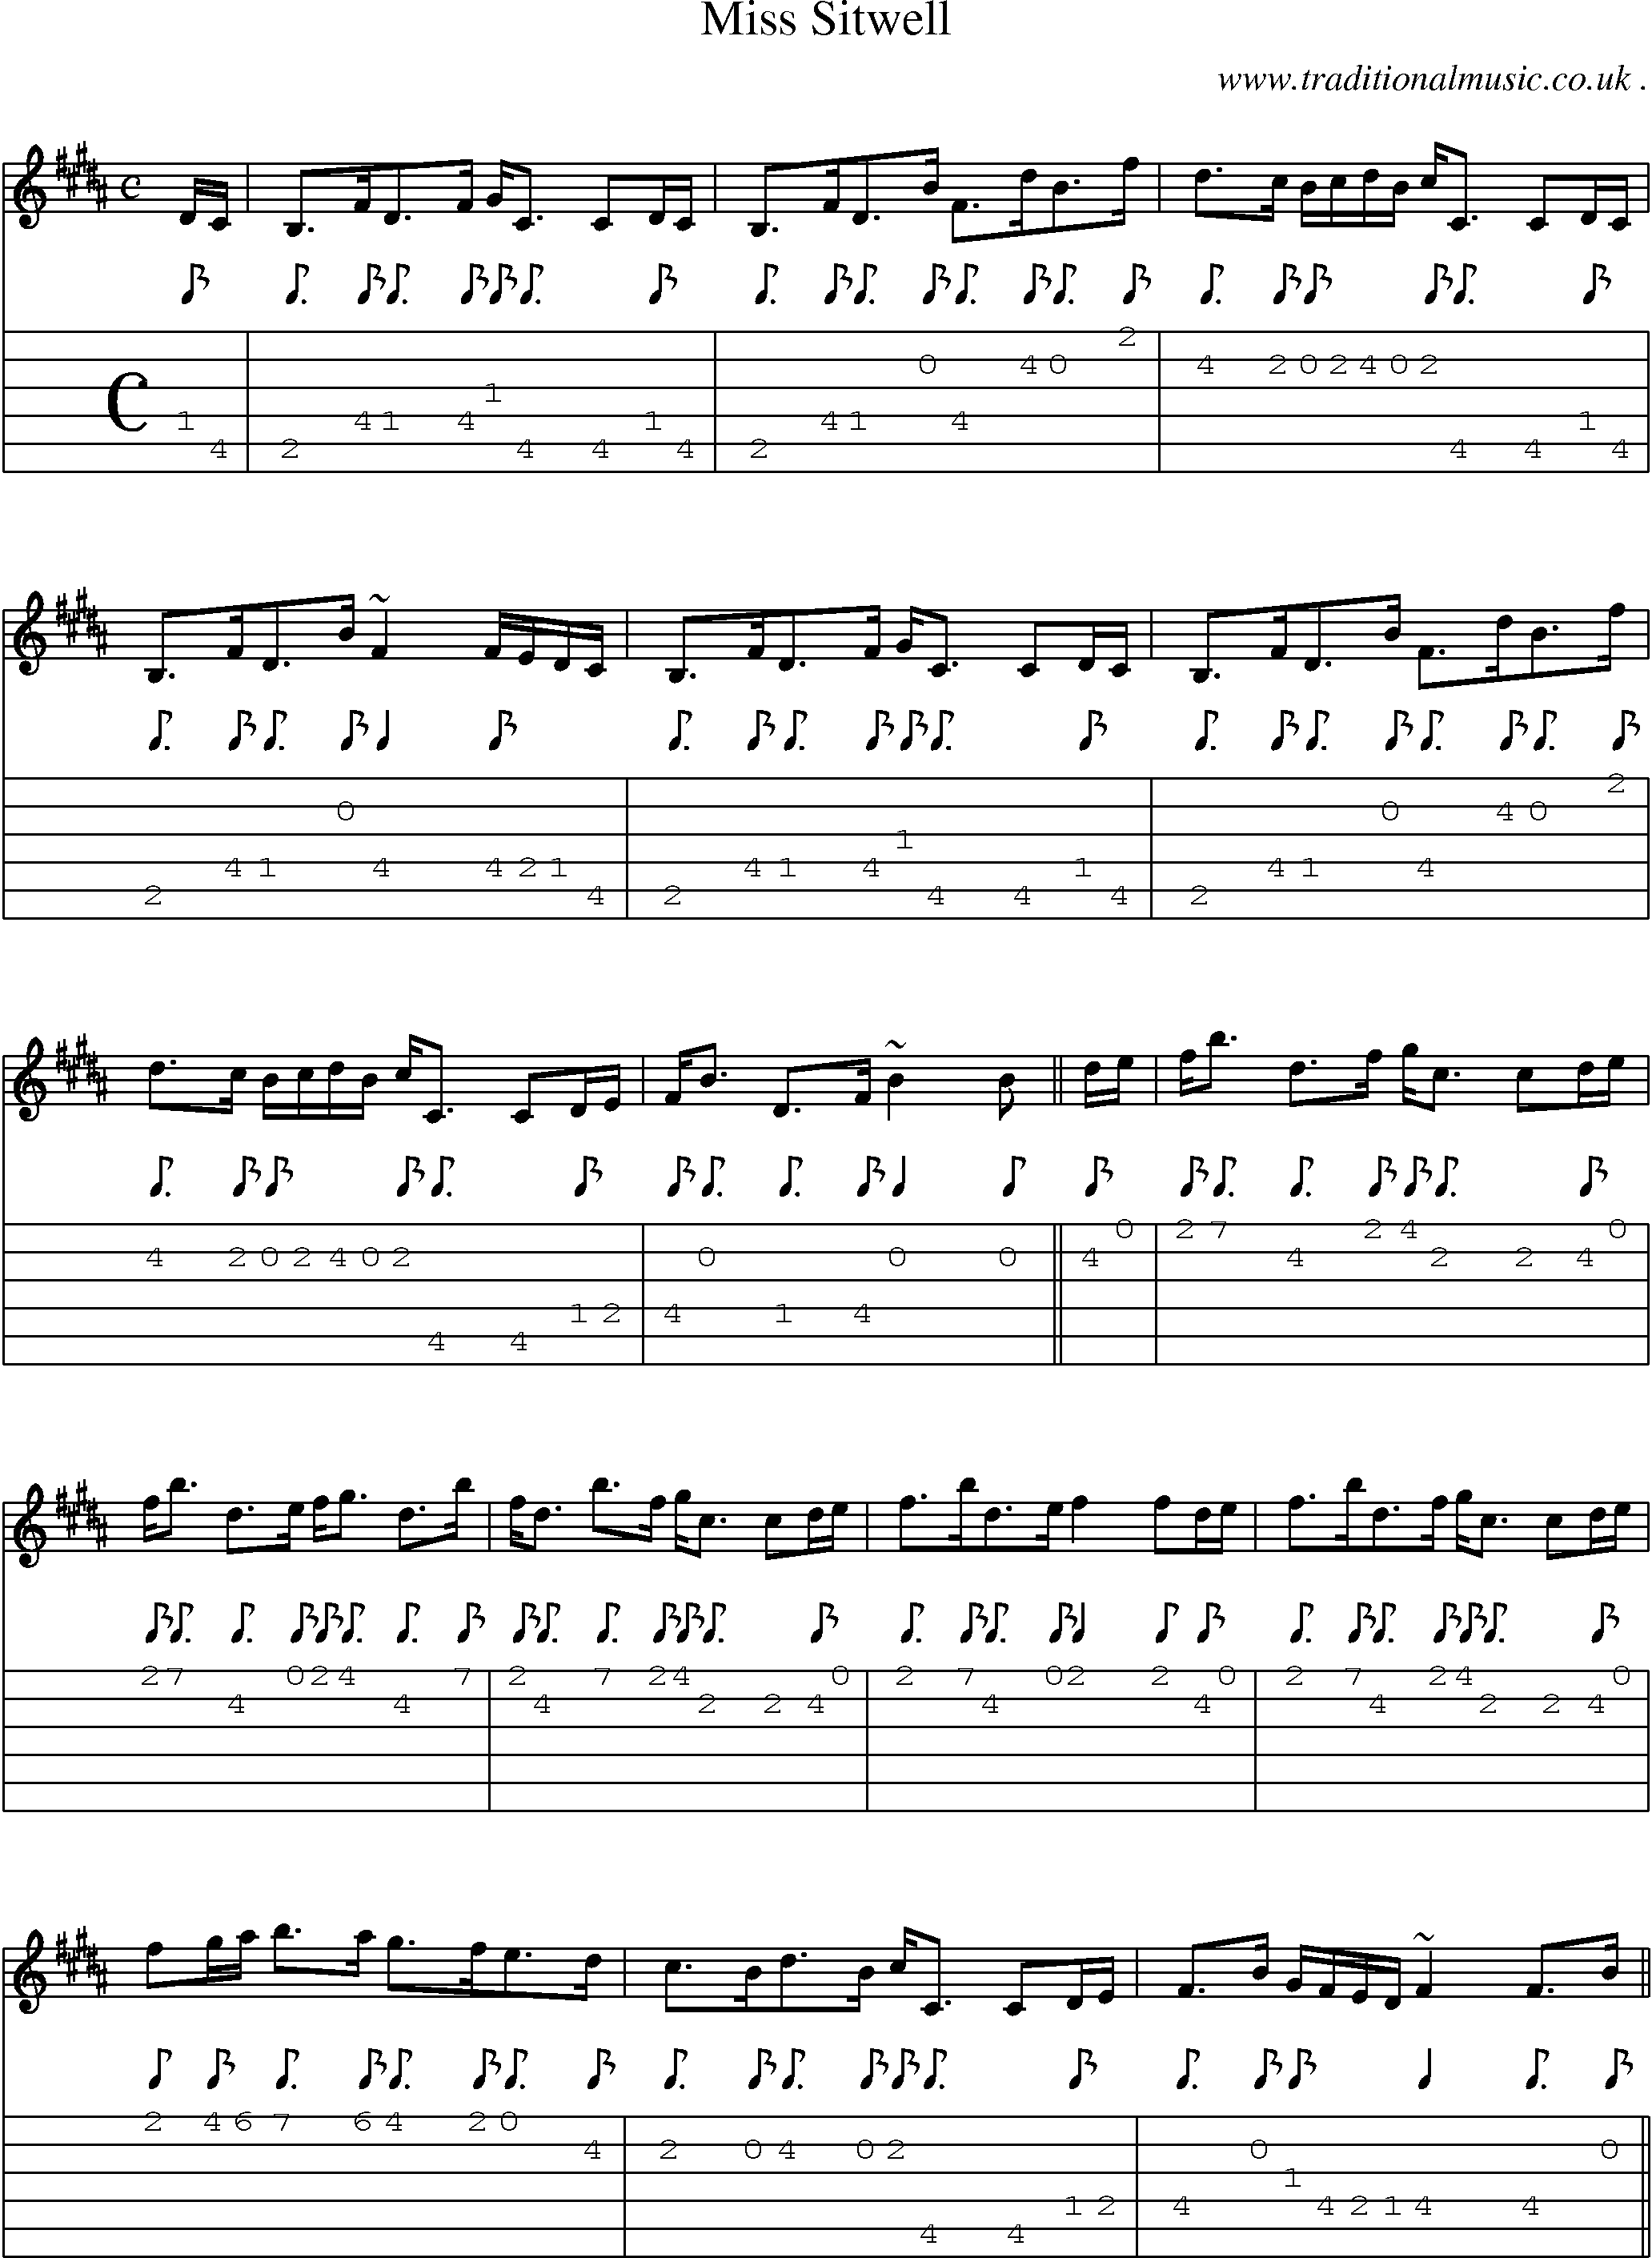 Sheet-music  score, Chords and Guitar Tabs for Miss Sitwell